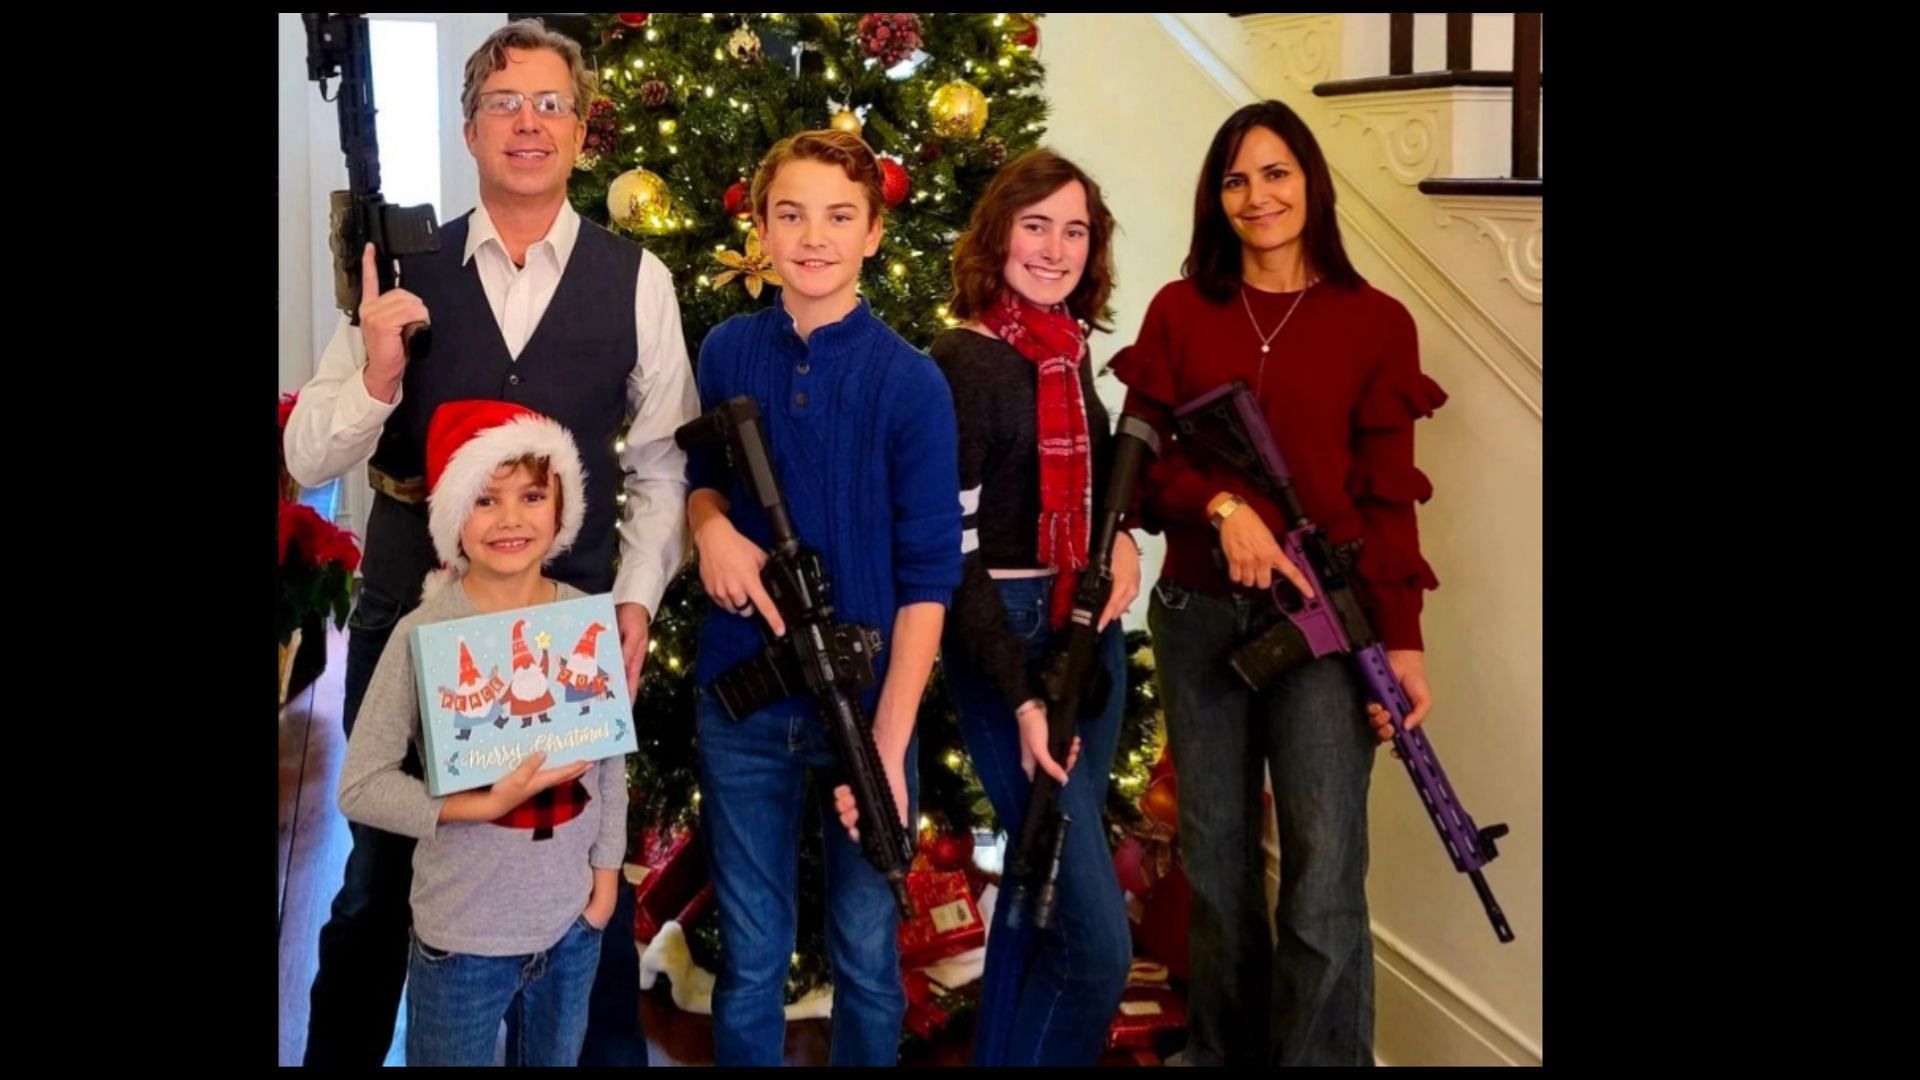 Andy Ogles and his family in a Christmas card in 2021 (Image via Twitter/krassenstein)